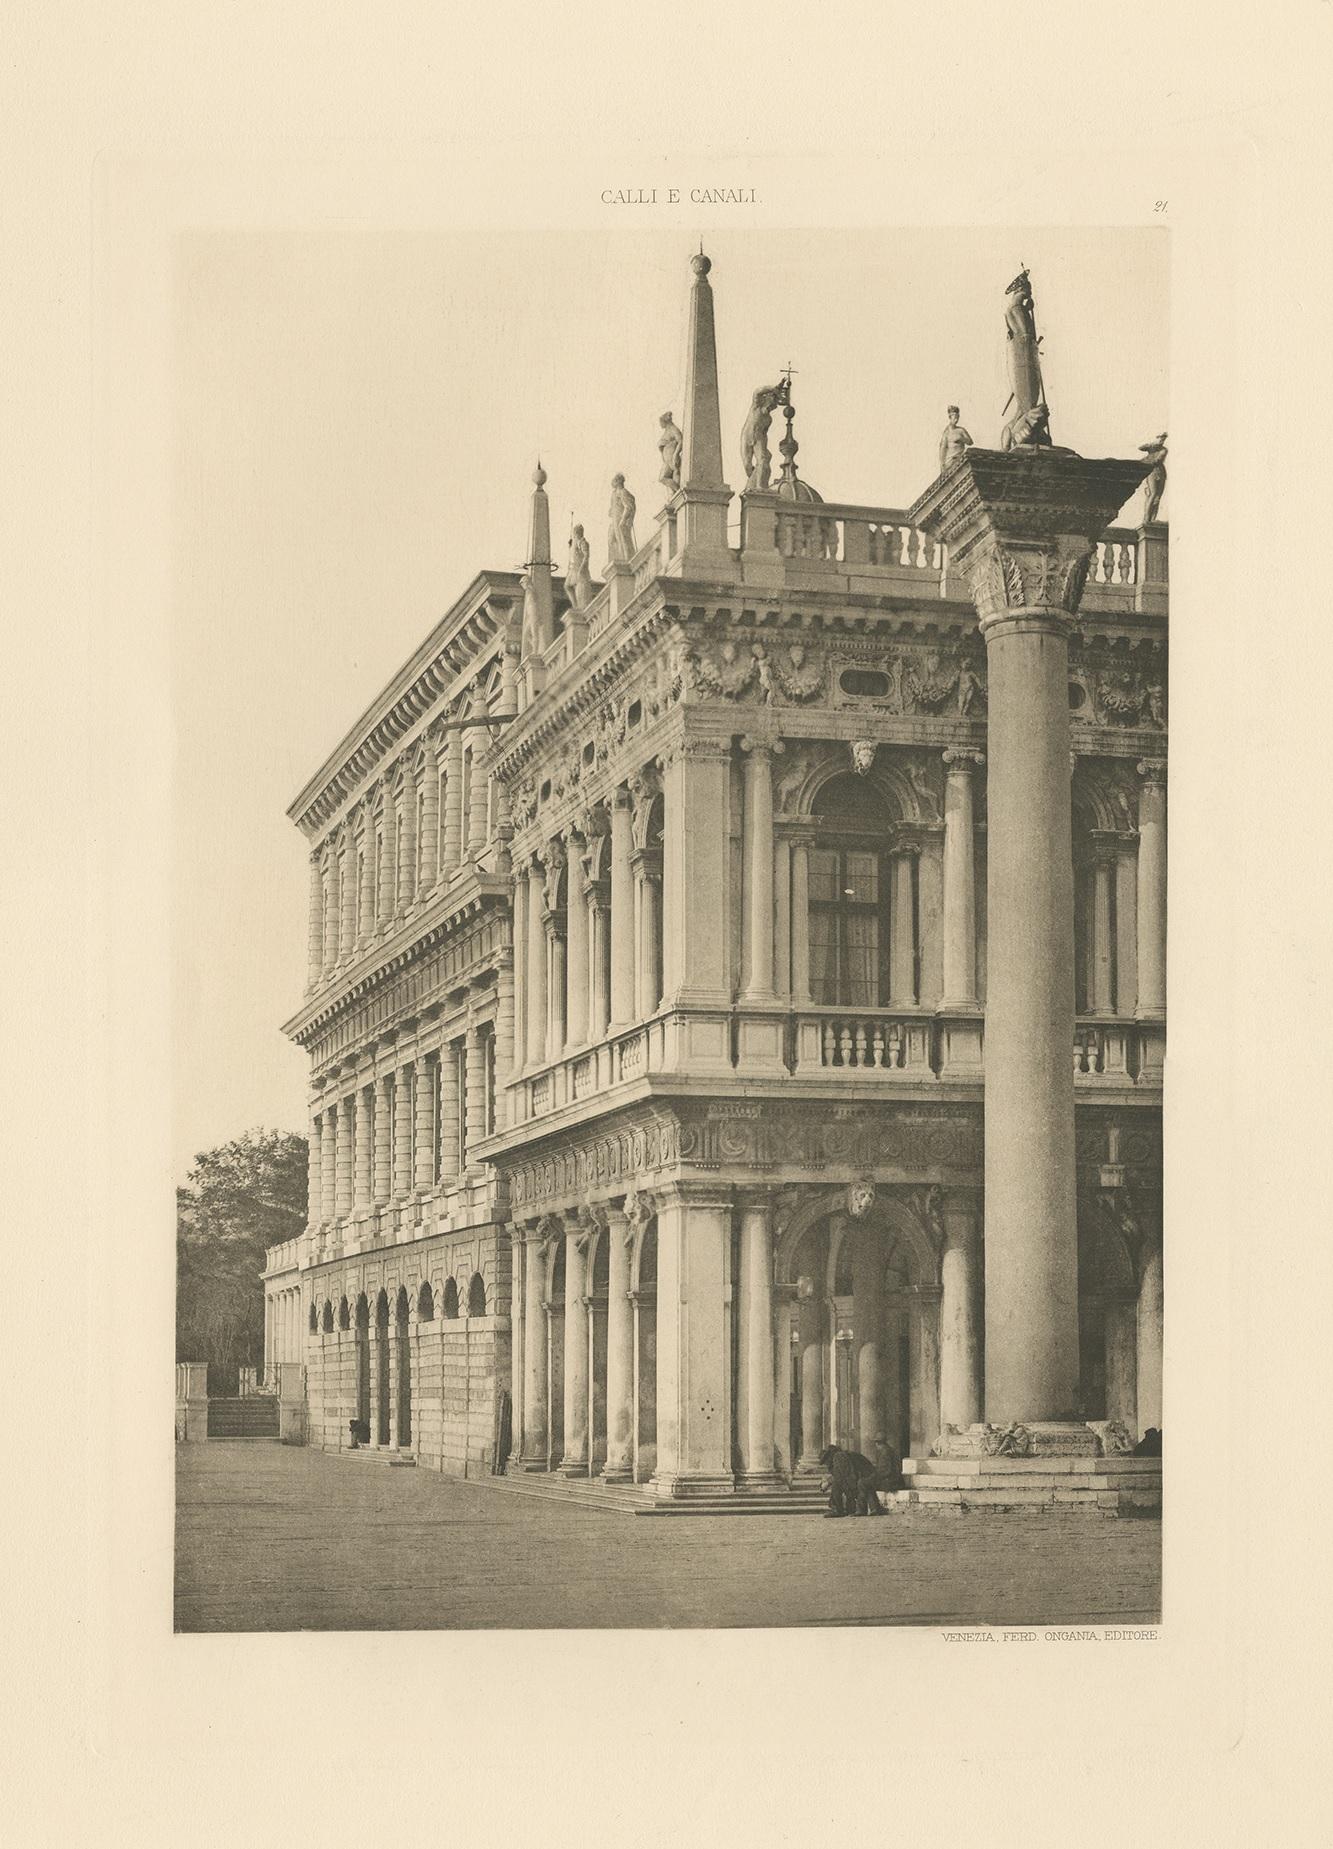 Photogravure of the column of San Todaro in Venice. This print originates from 'Calli e Canali - Streets and Canals in Venice edited by Ferdinand Ongania'. Published circa 1890.